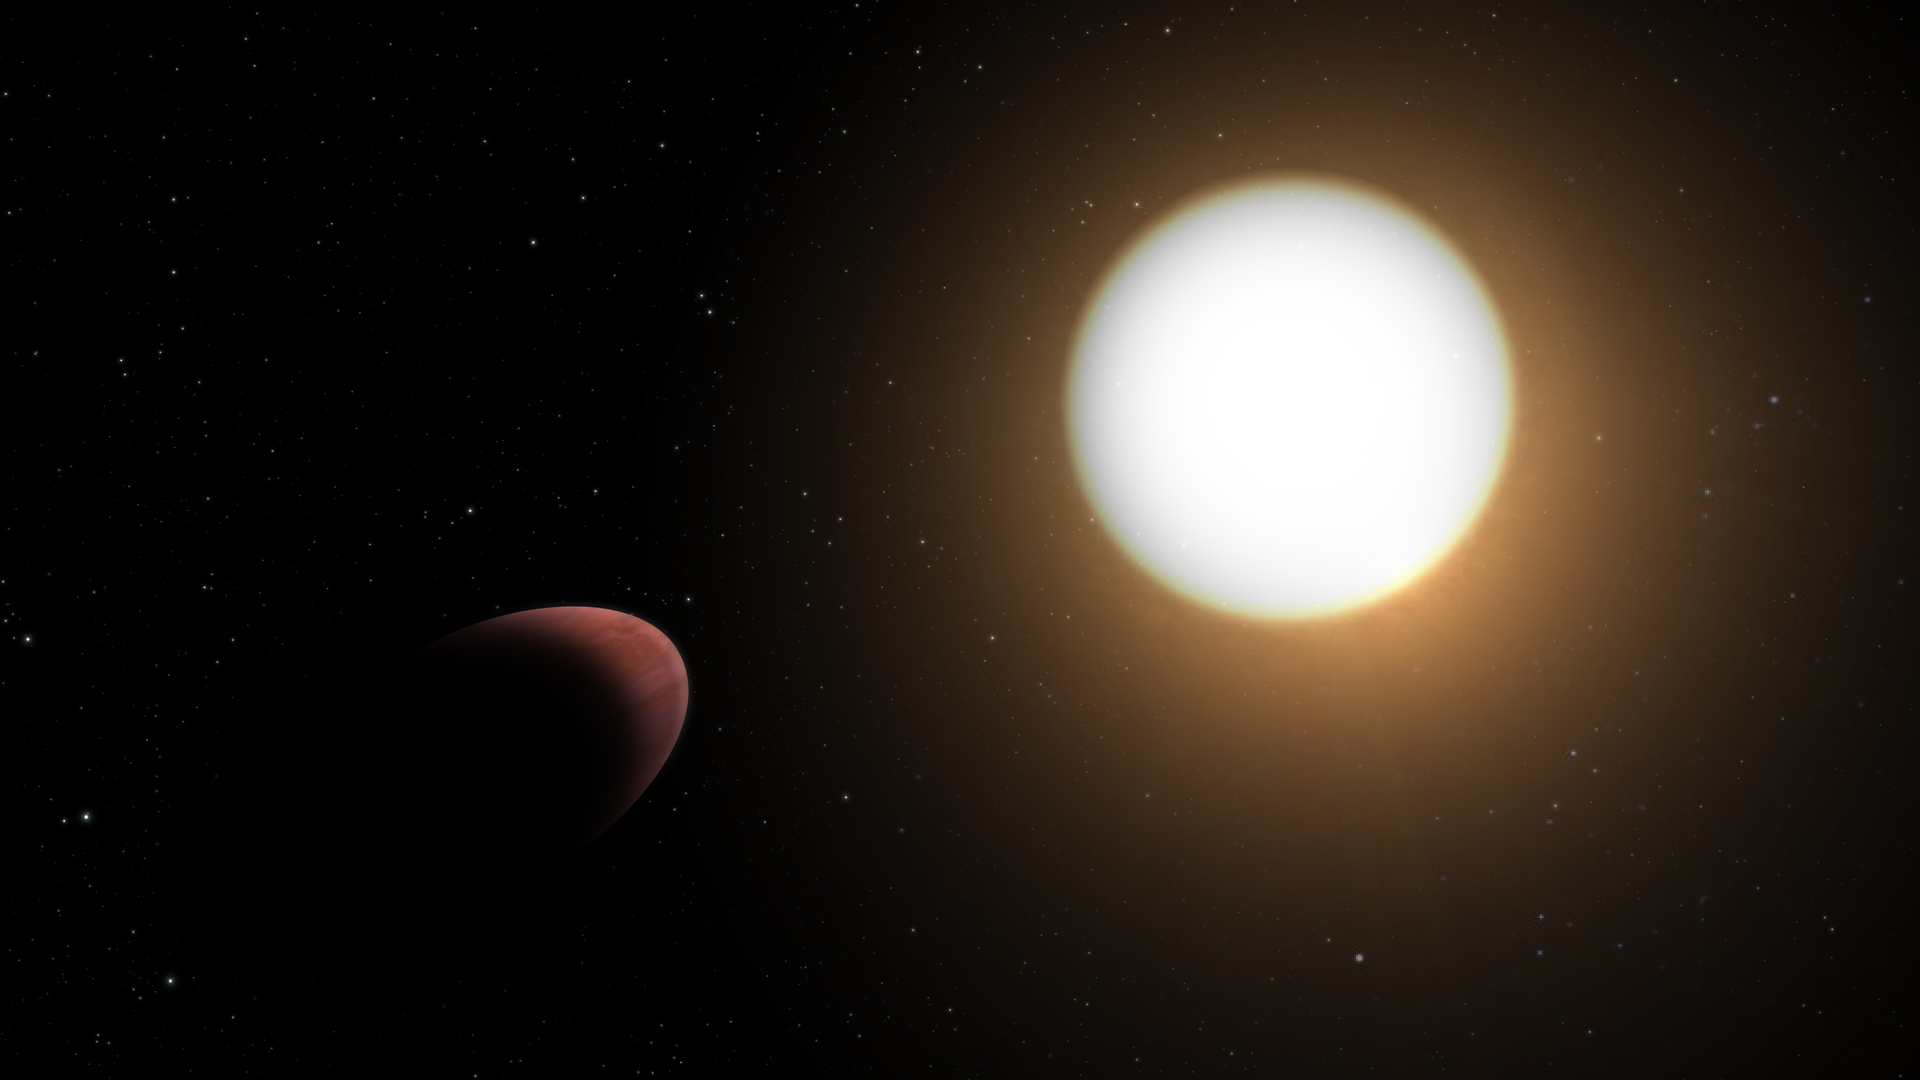 Rugby ball-shaped exoplanet discovered